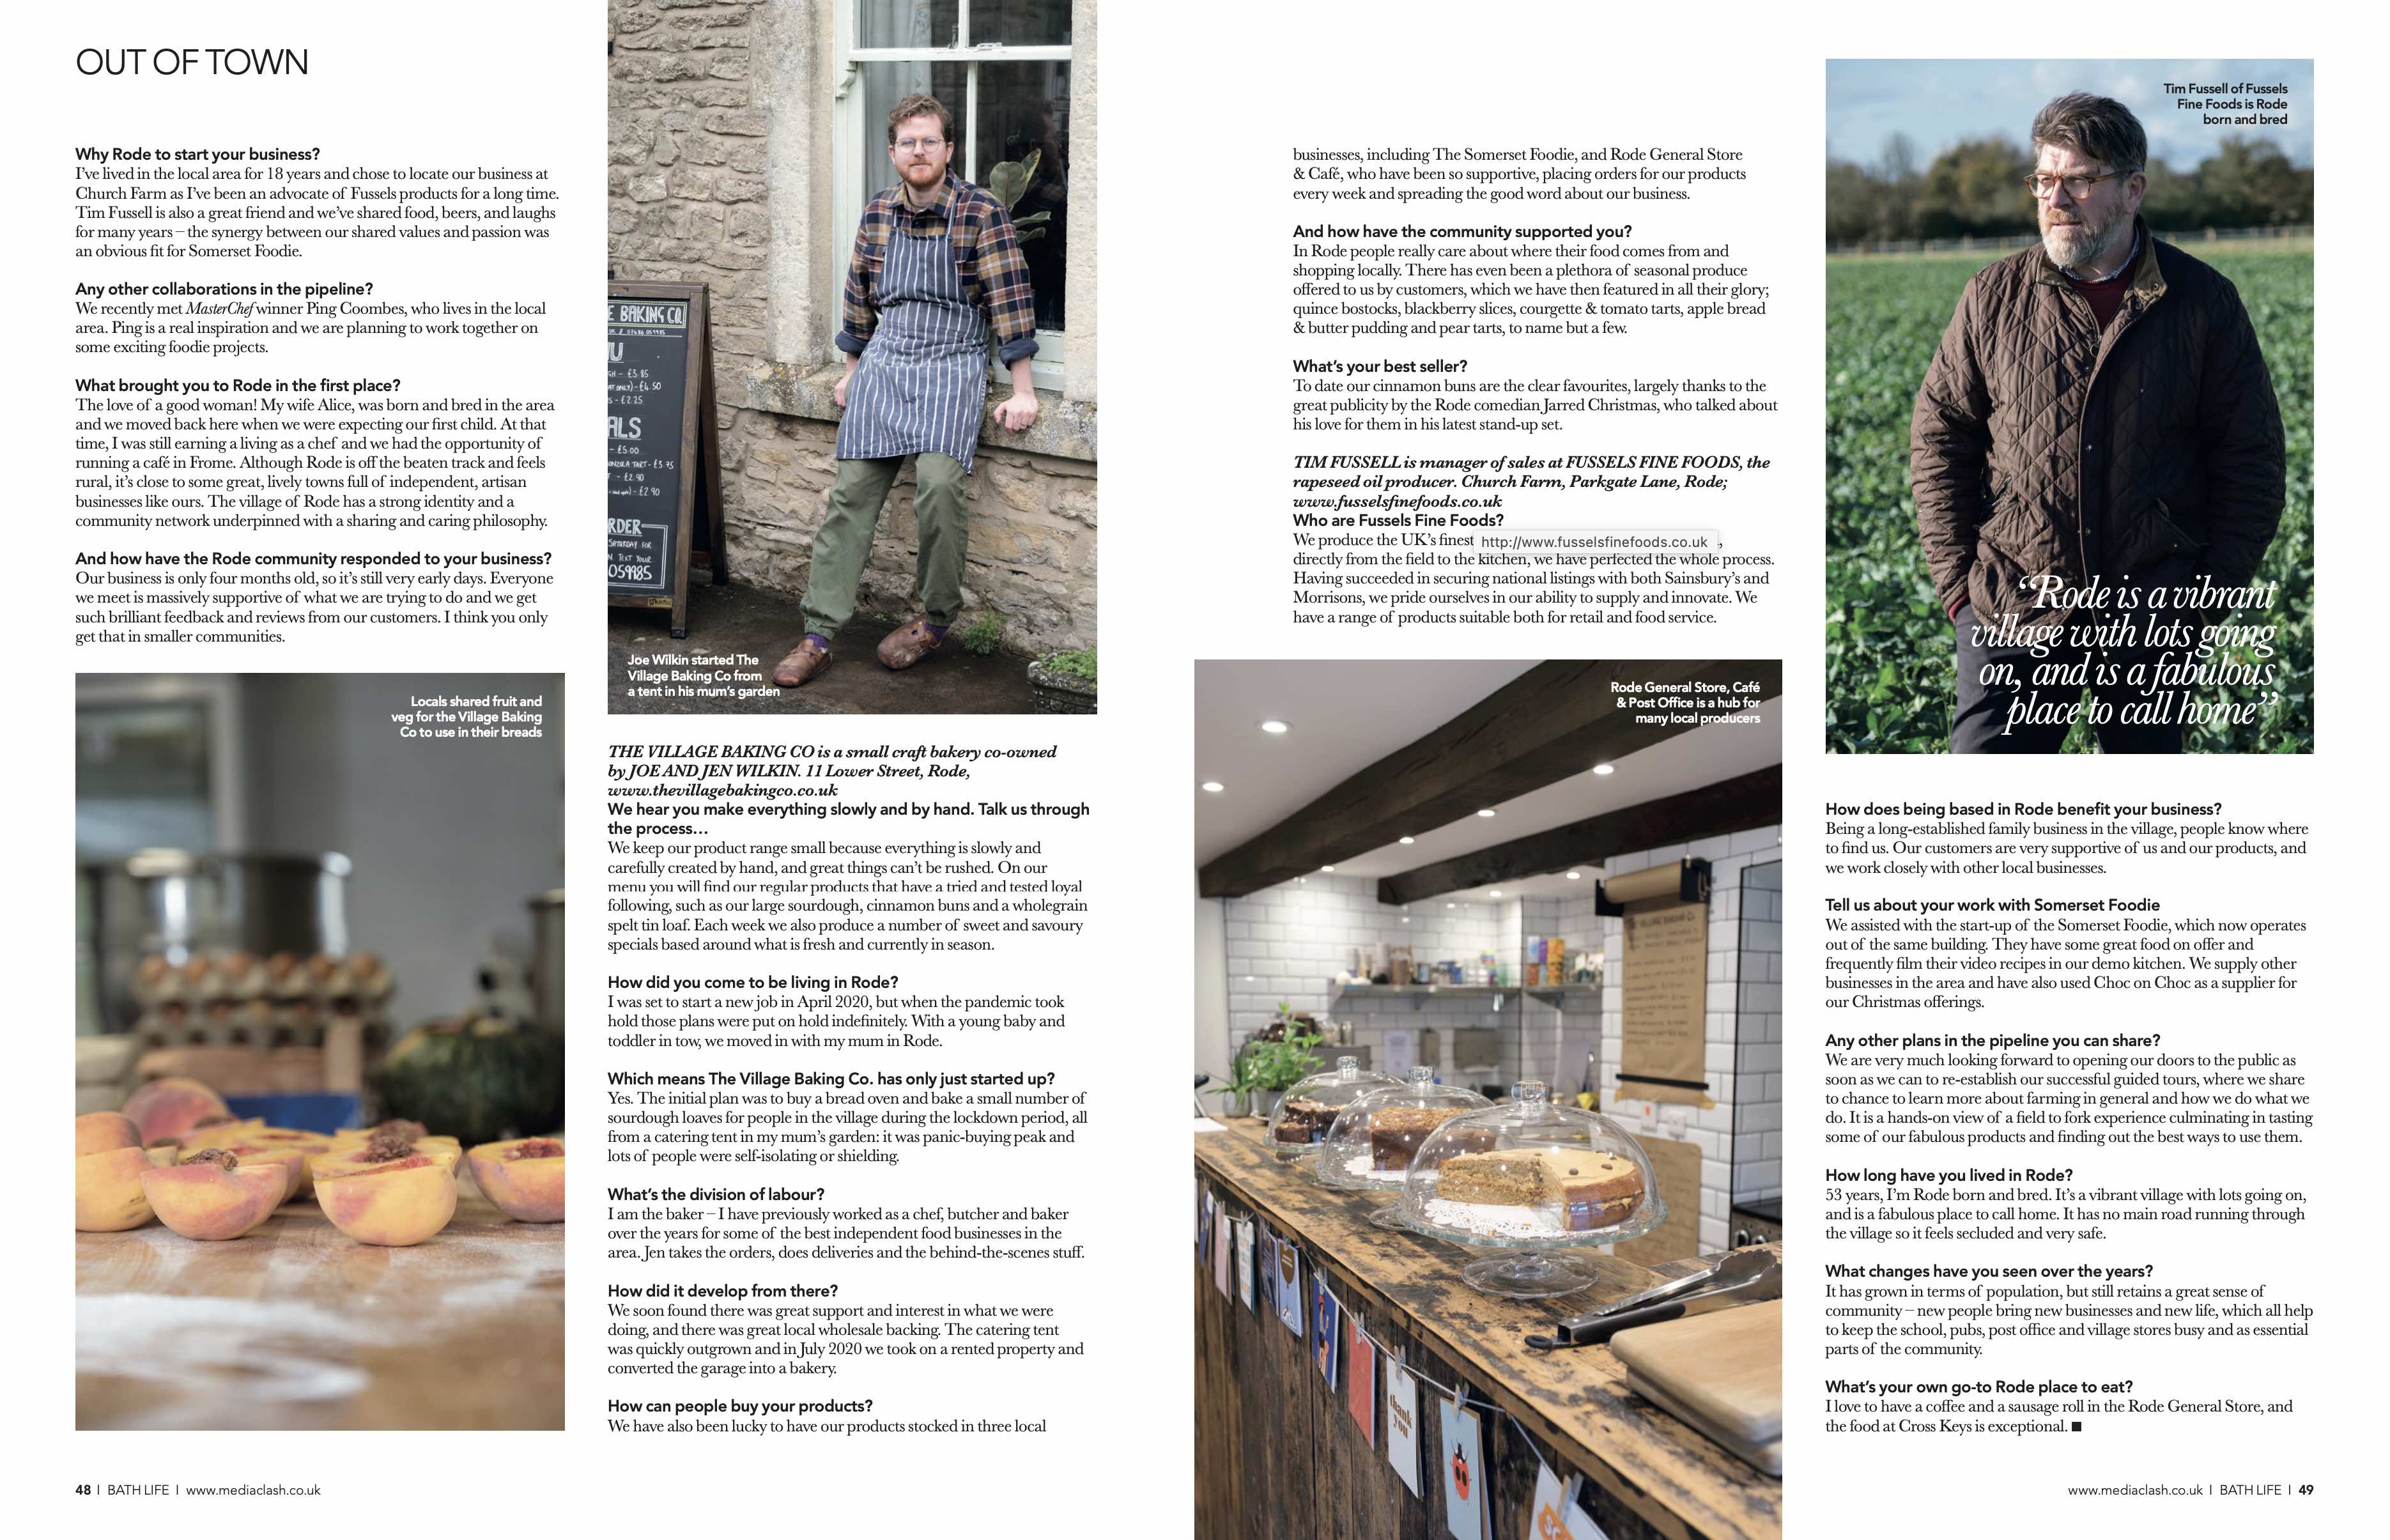 Bath Life Feature - the Foodie Rode Trip with photos by Nick Cole Photography